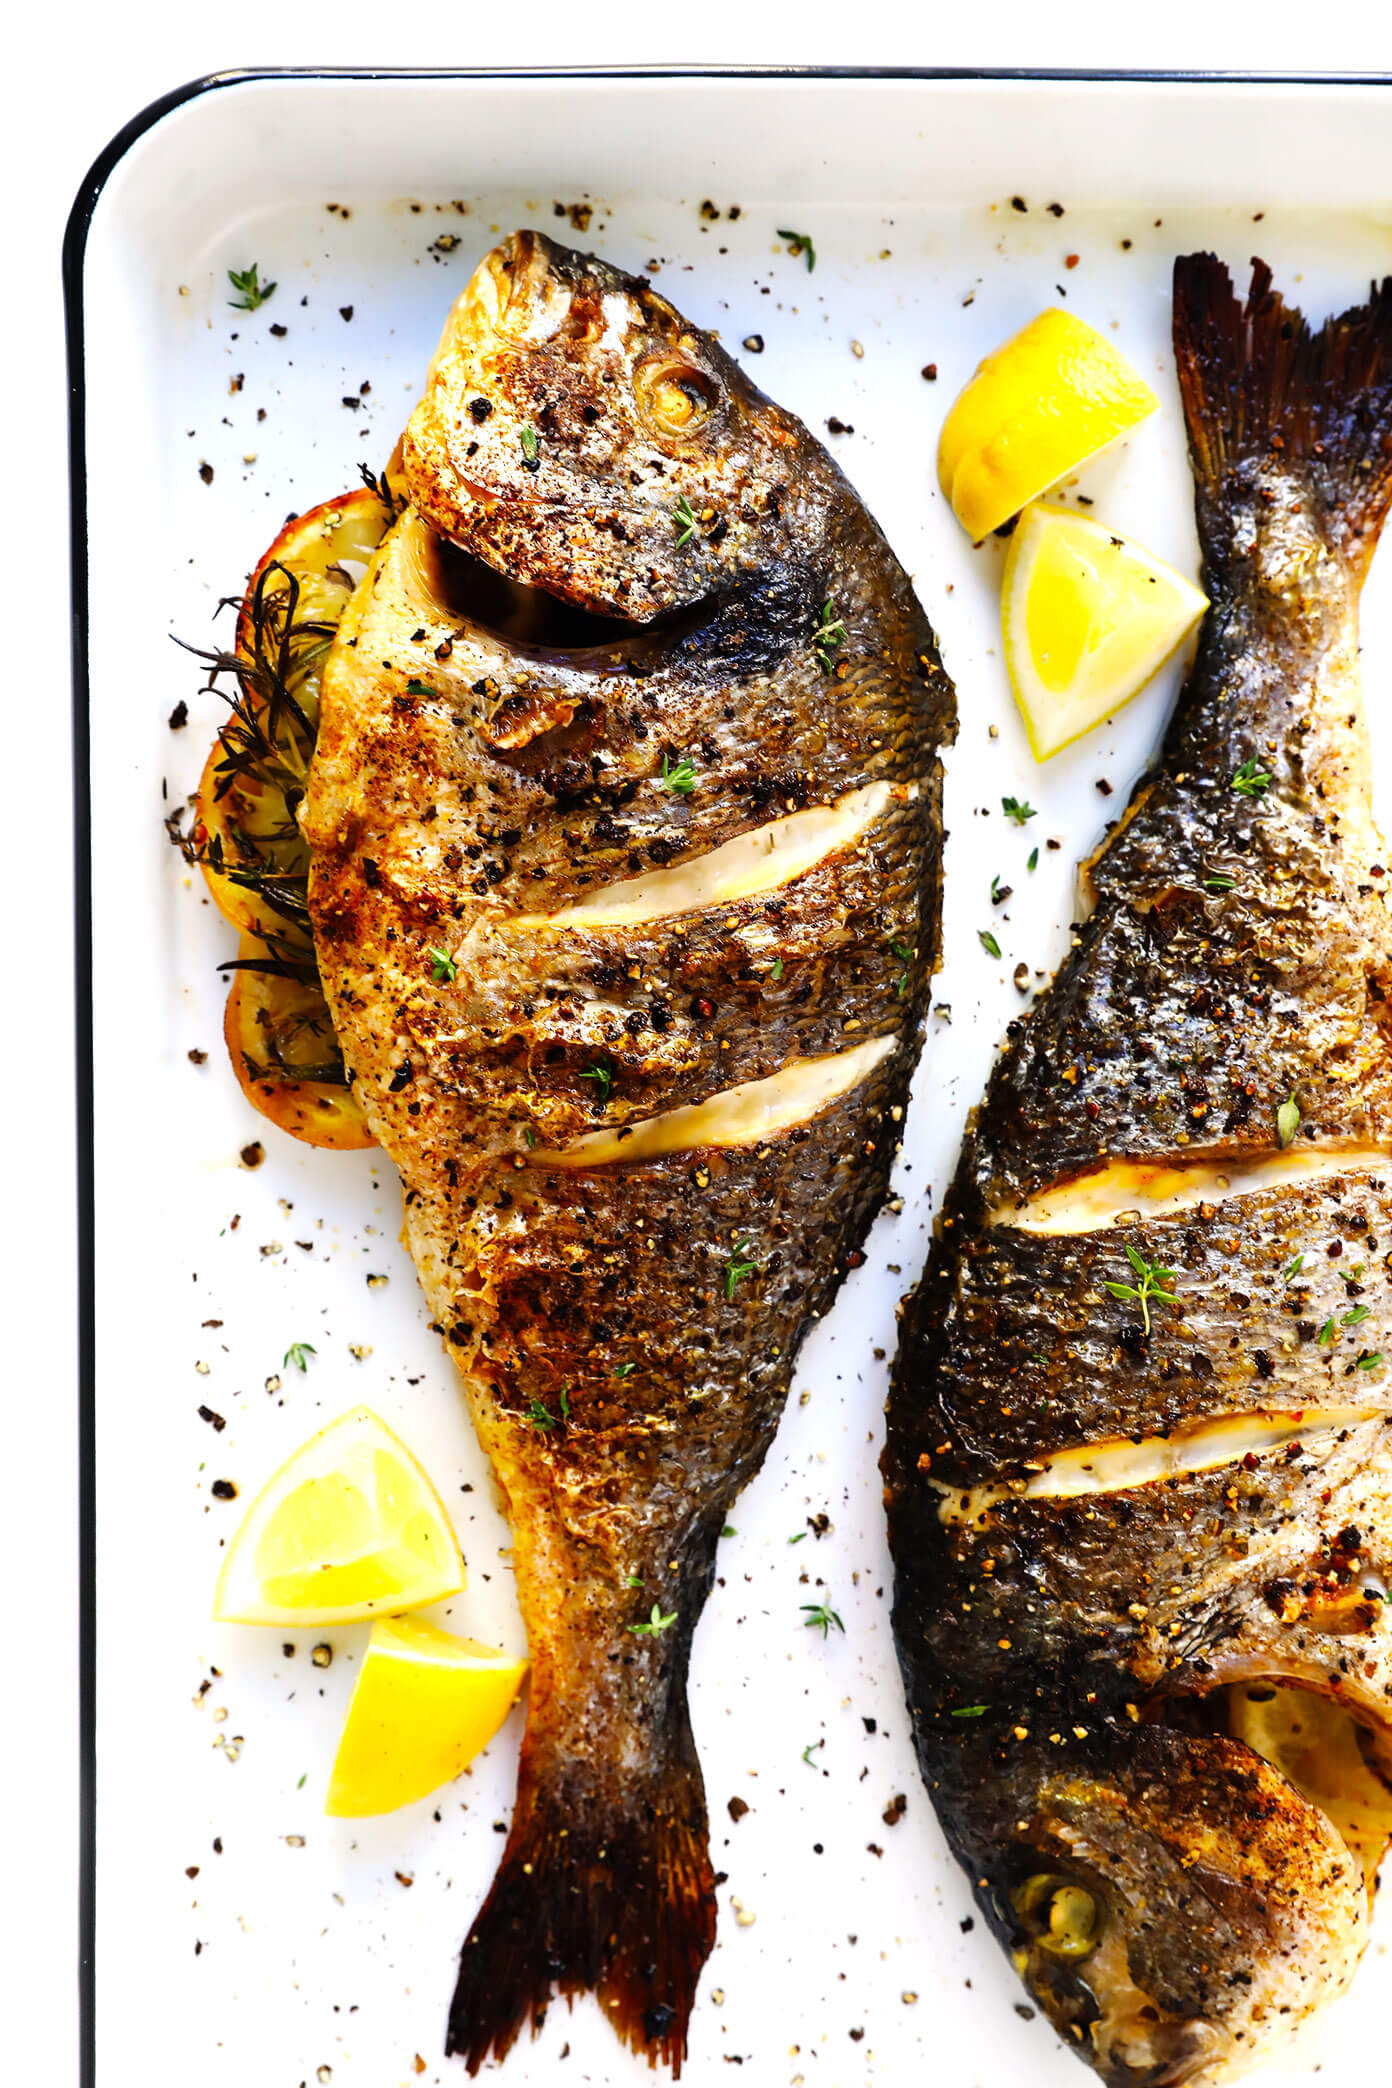 Recipes With Fish
 How To Cook A Whole Fish